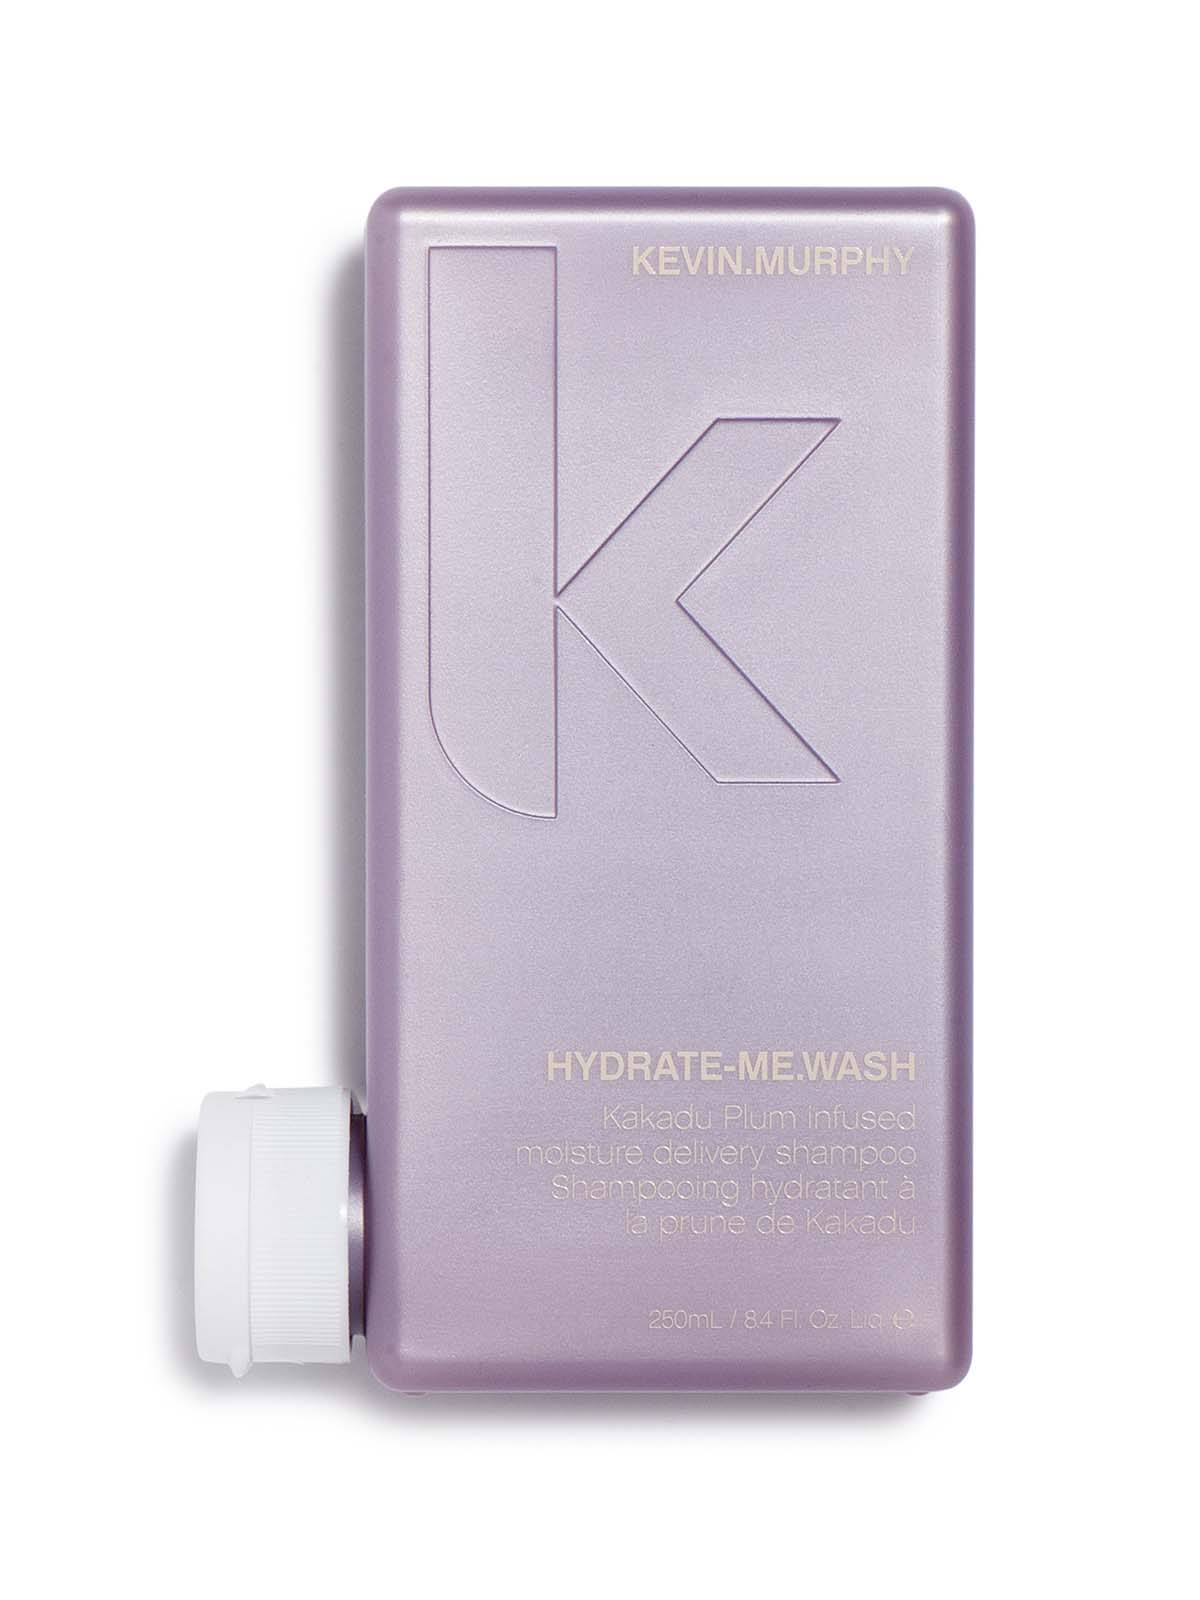 KEVIN.MURPHY HYDRATE-ME.WASH